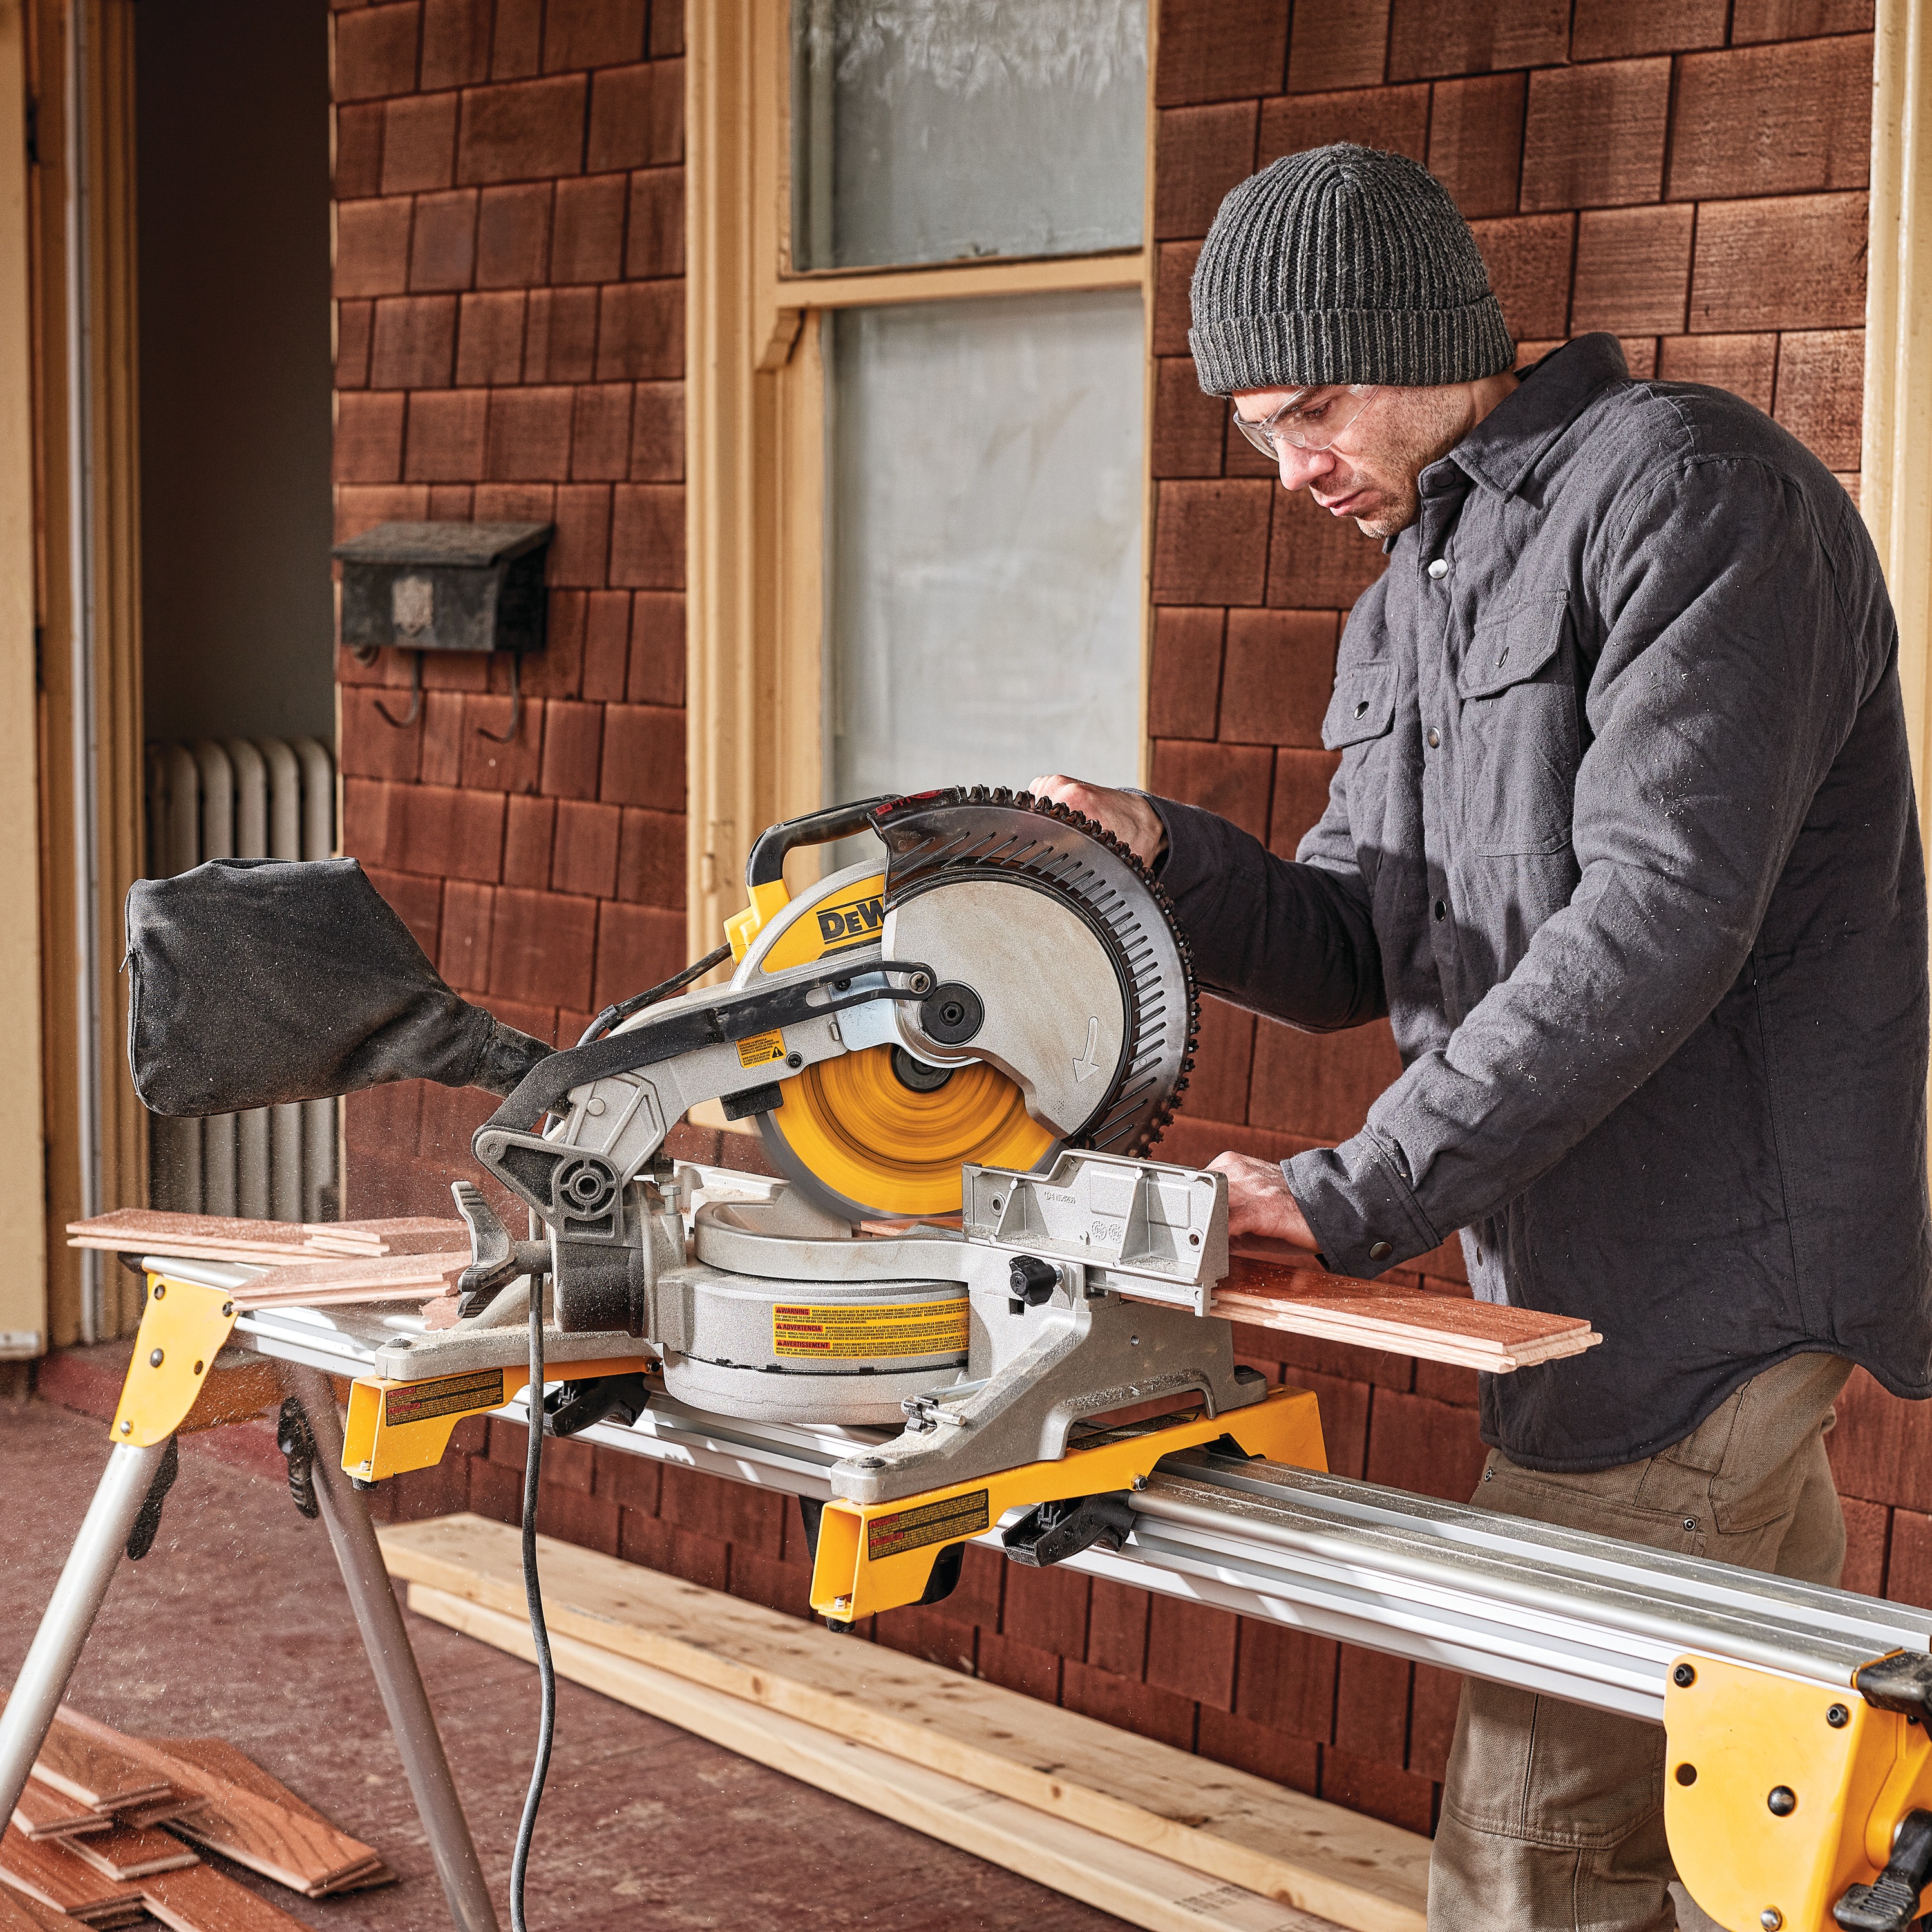 Electric single bevel compound miter saw being used by a person to cut wood.